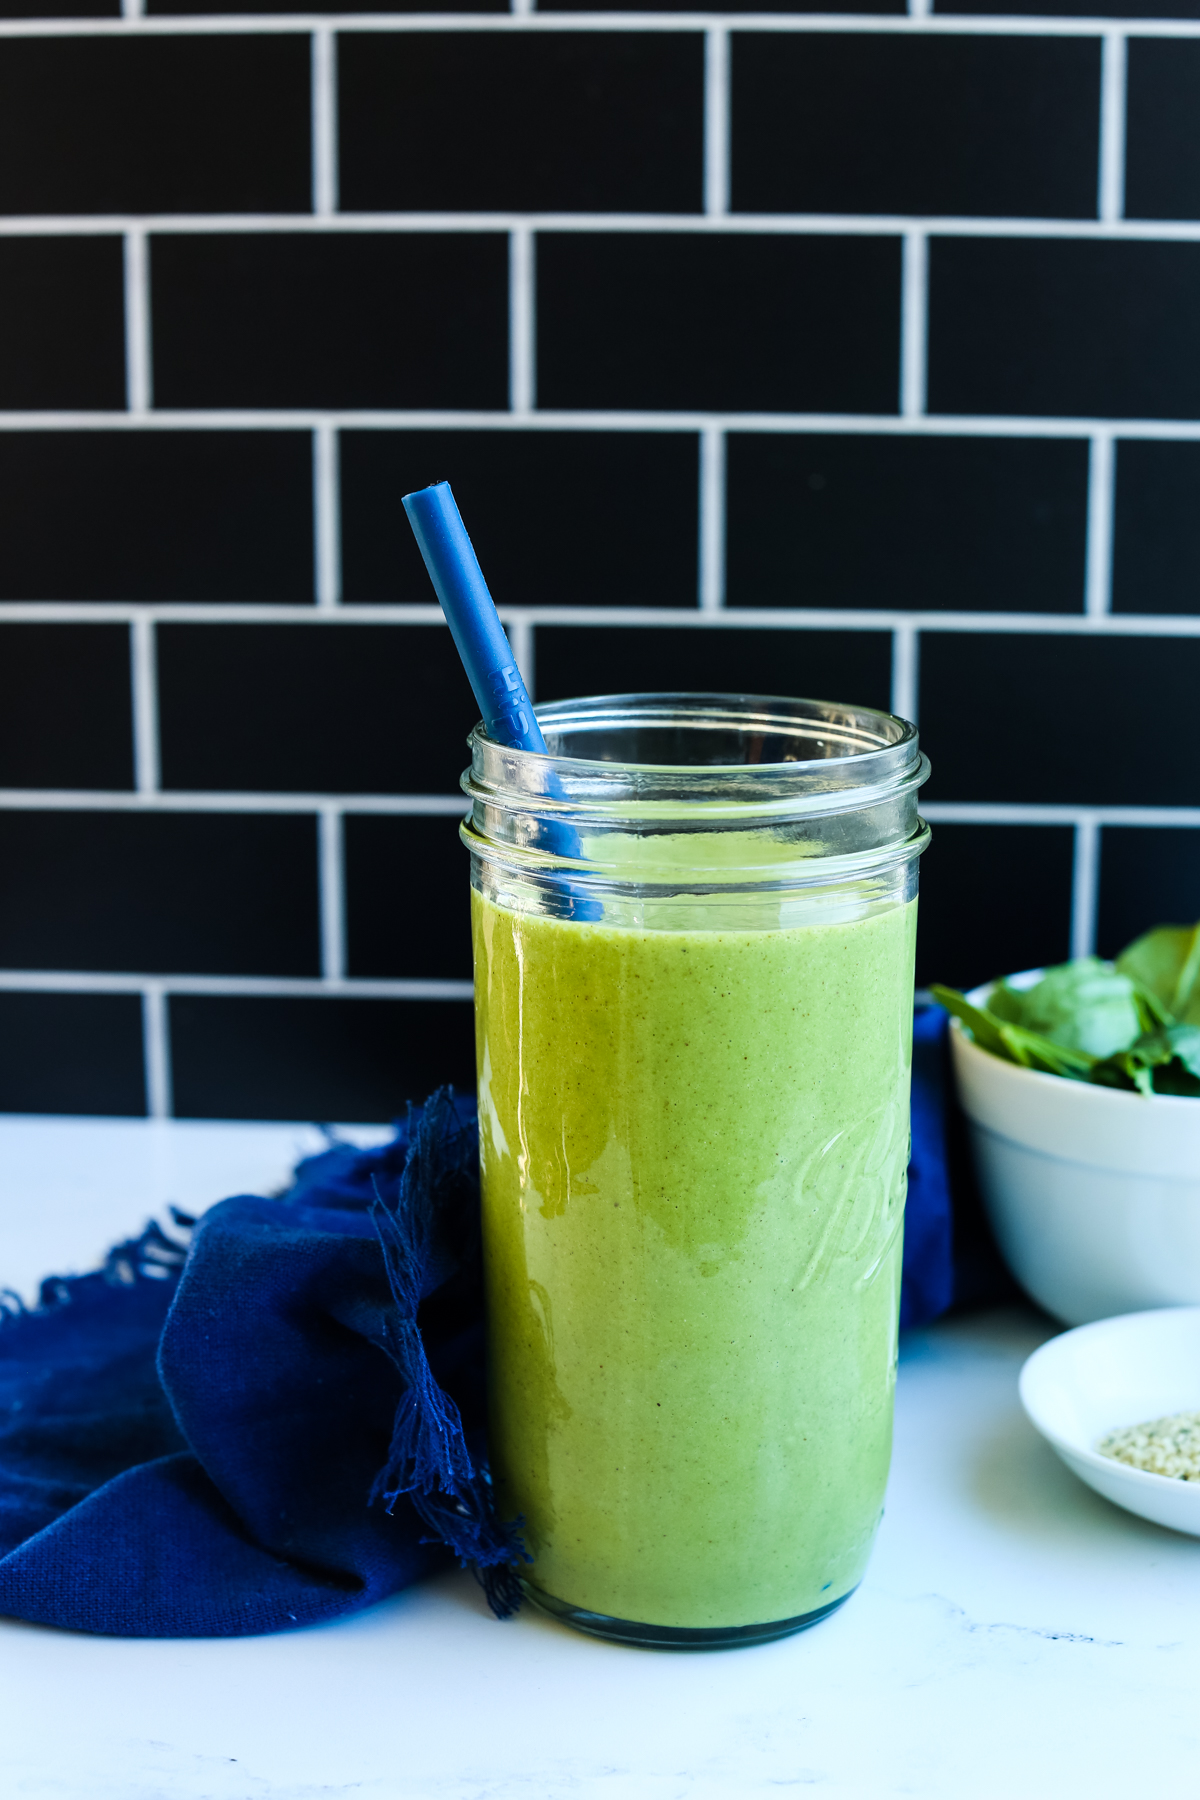 Green power smoothie in a ball mason jar with a blue straw